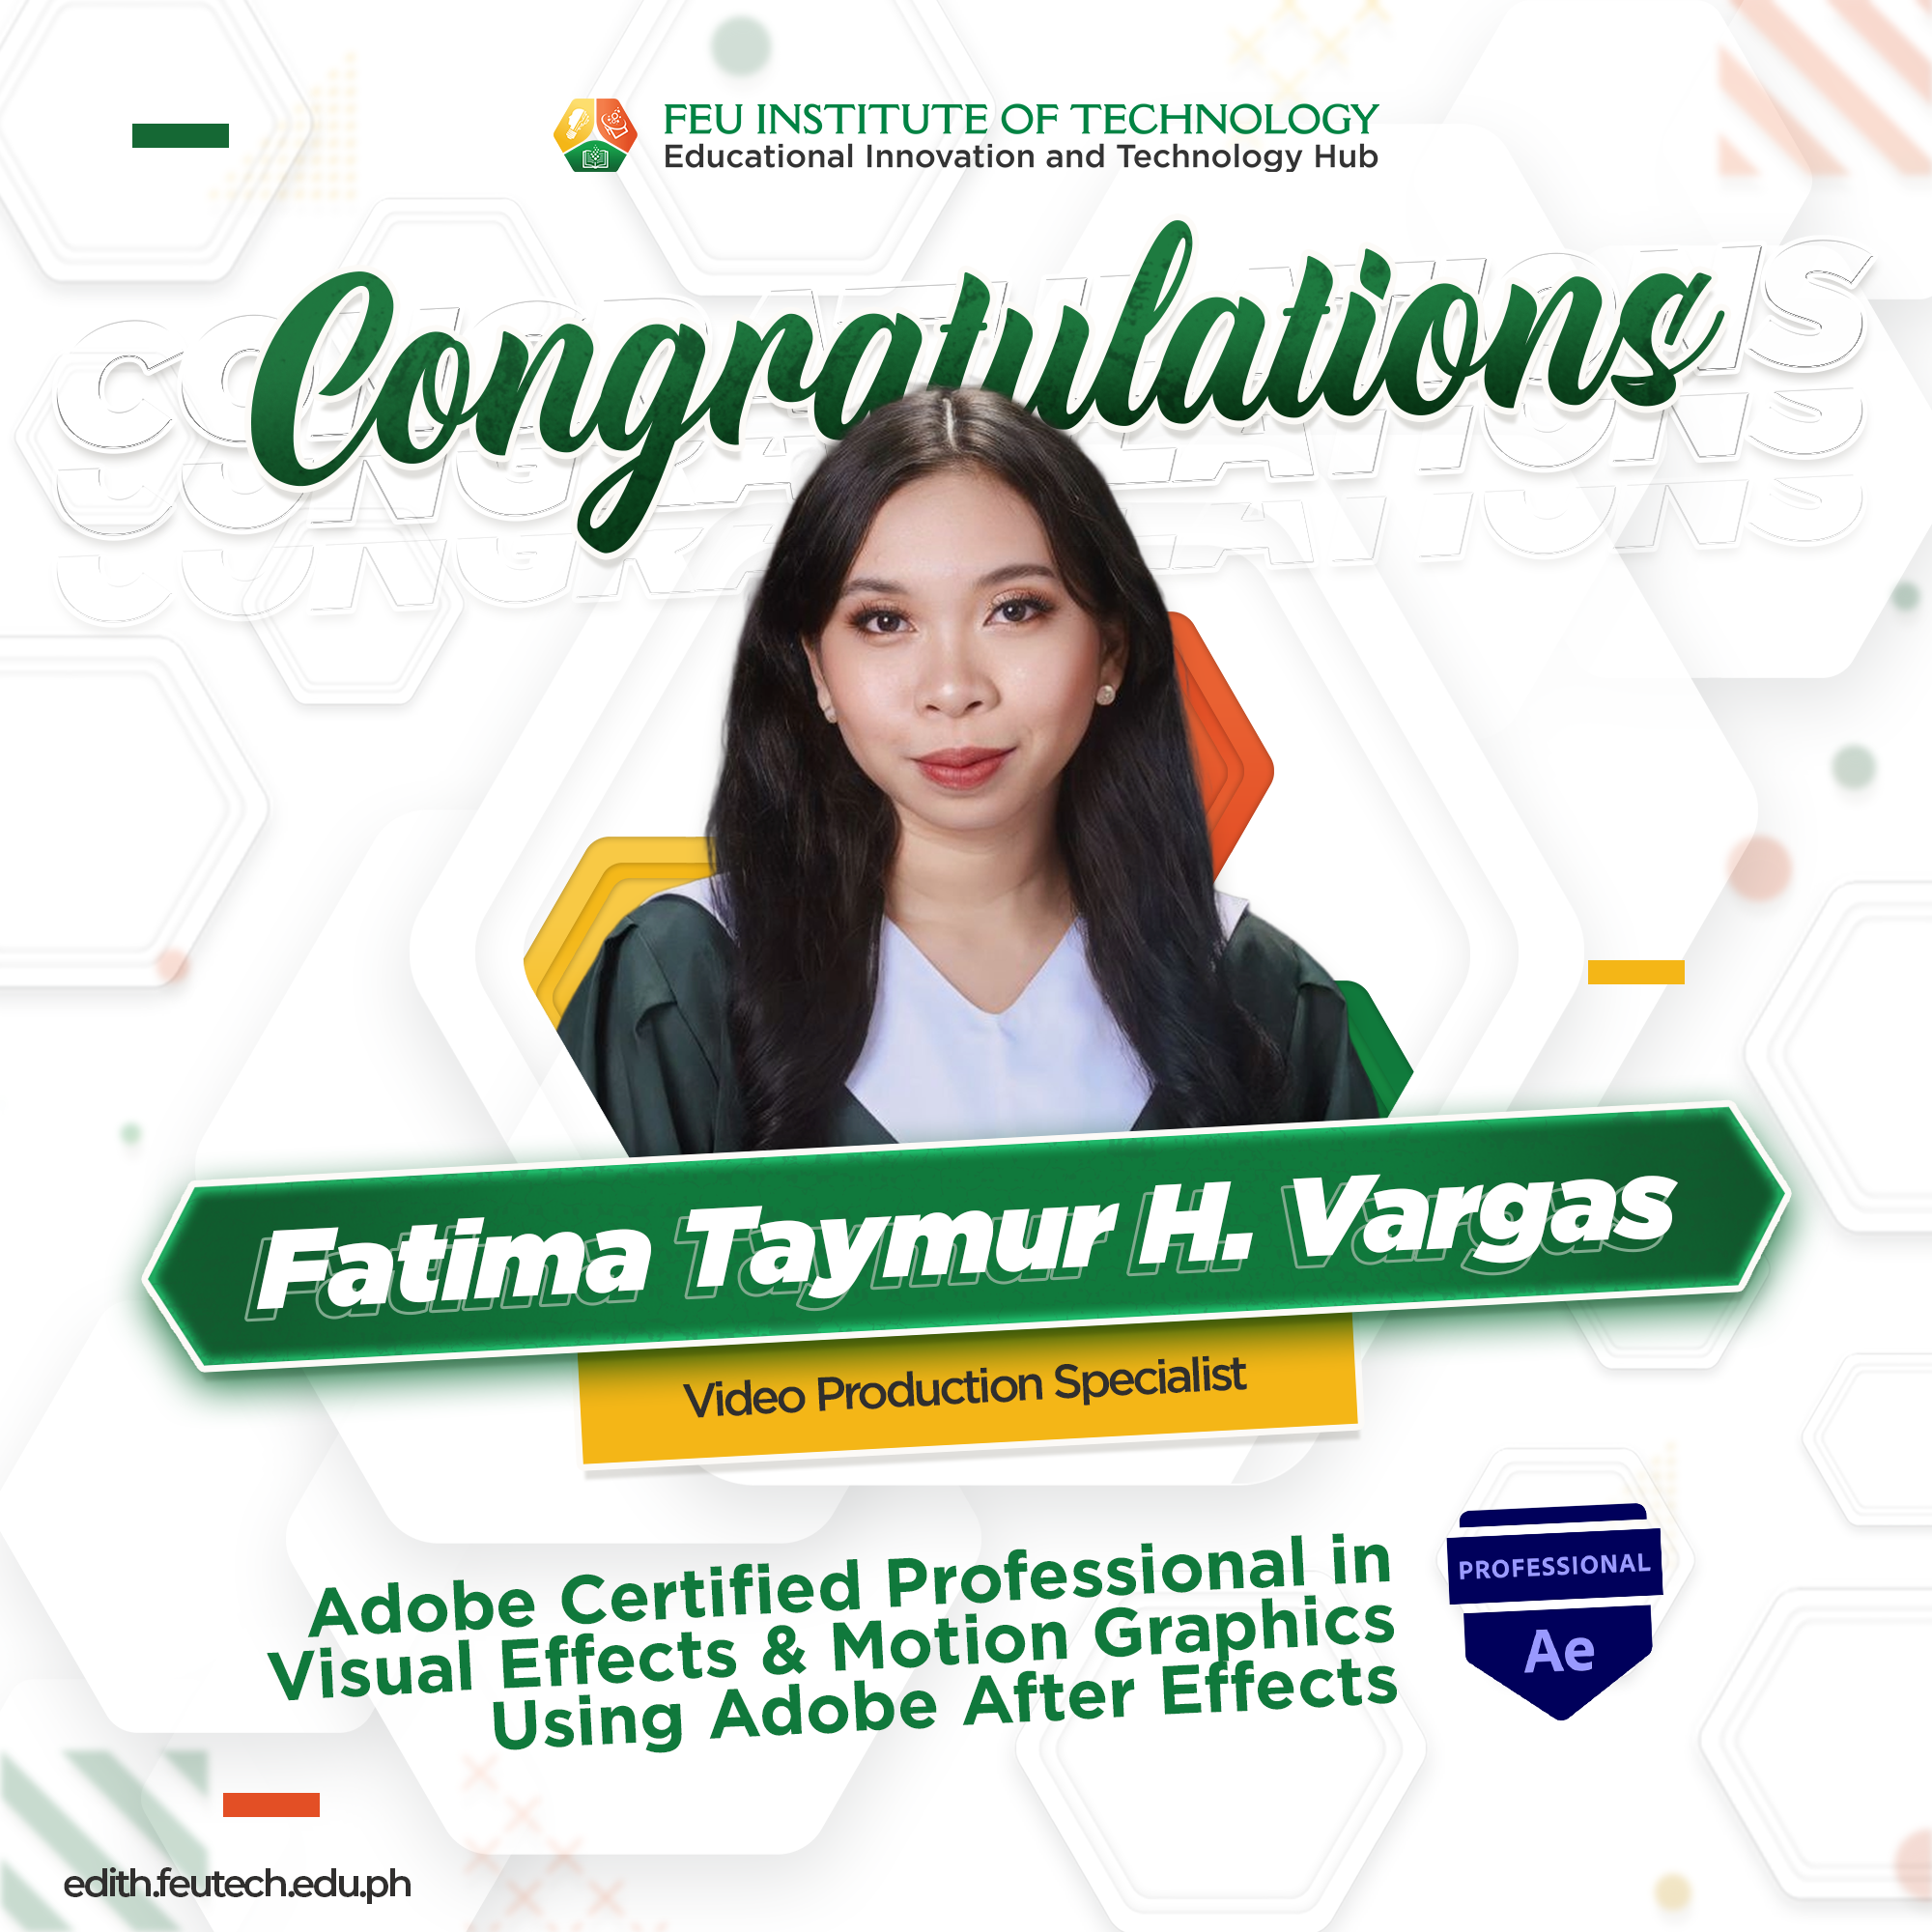 Fatima Taymur H. Vargas is now an Adobe Certified Professional in Visual Effects & Motion Graphics Using Adobe After Effects